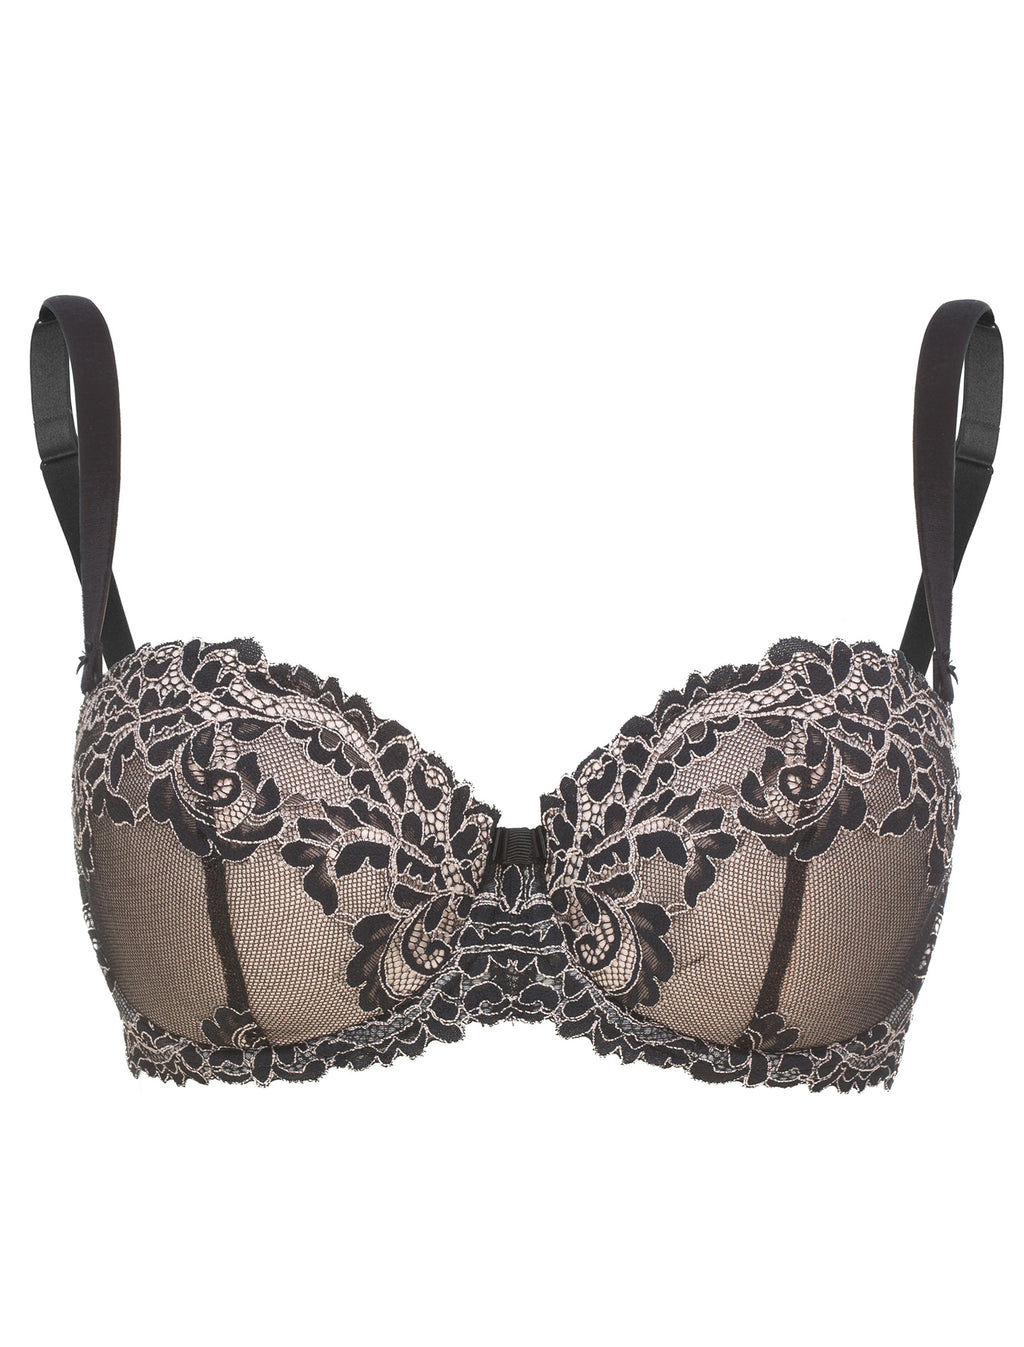 Sevilla Scroll Embroidery Semi Demi Bra - #14011 - Up to Size 46 - Lunaire:  Prettier Bras That Fit & Flatter Your Curves!